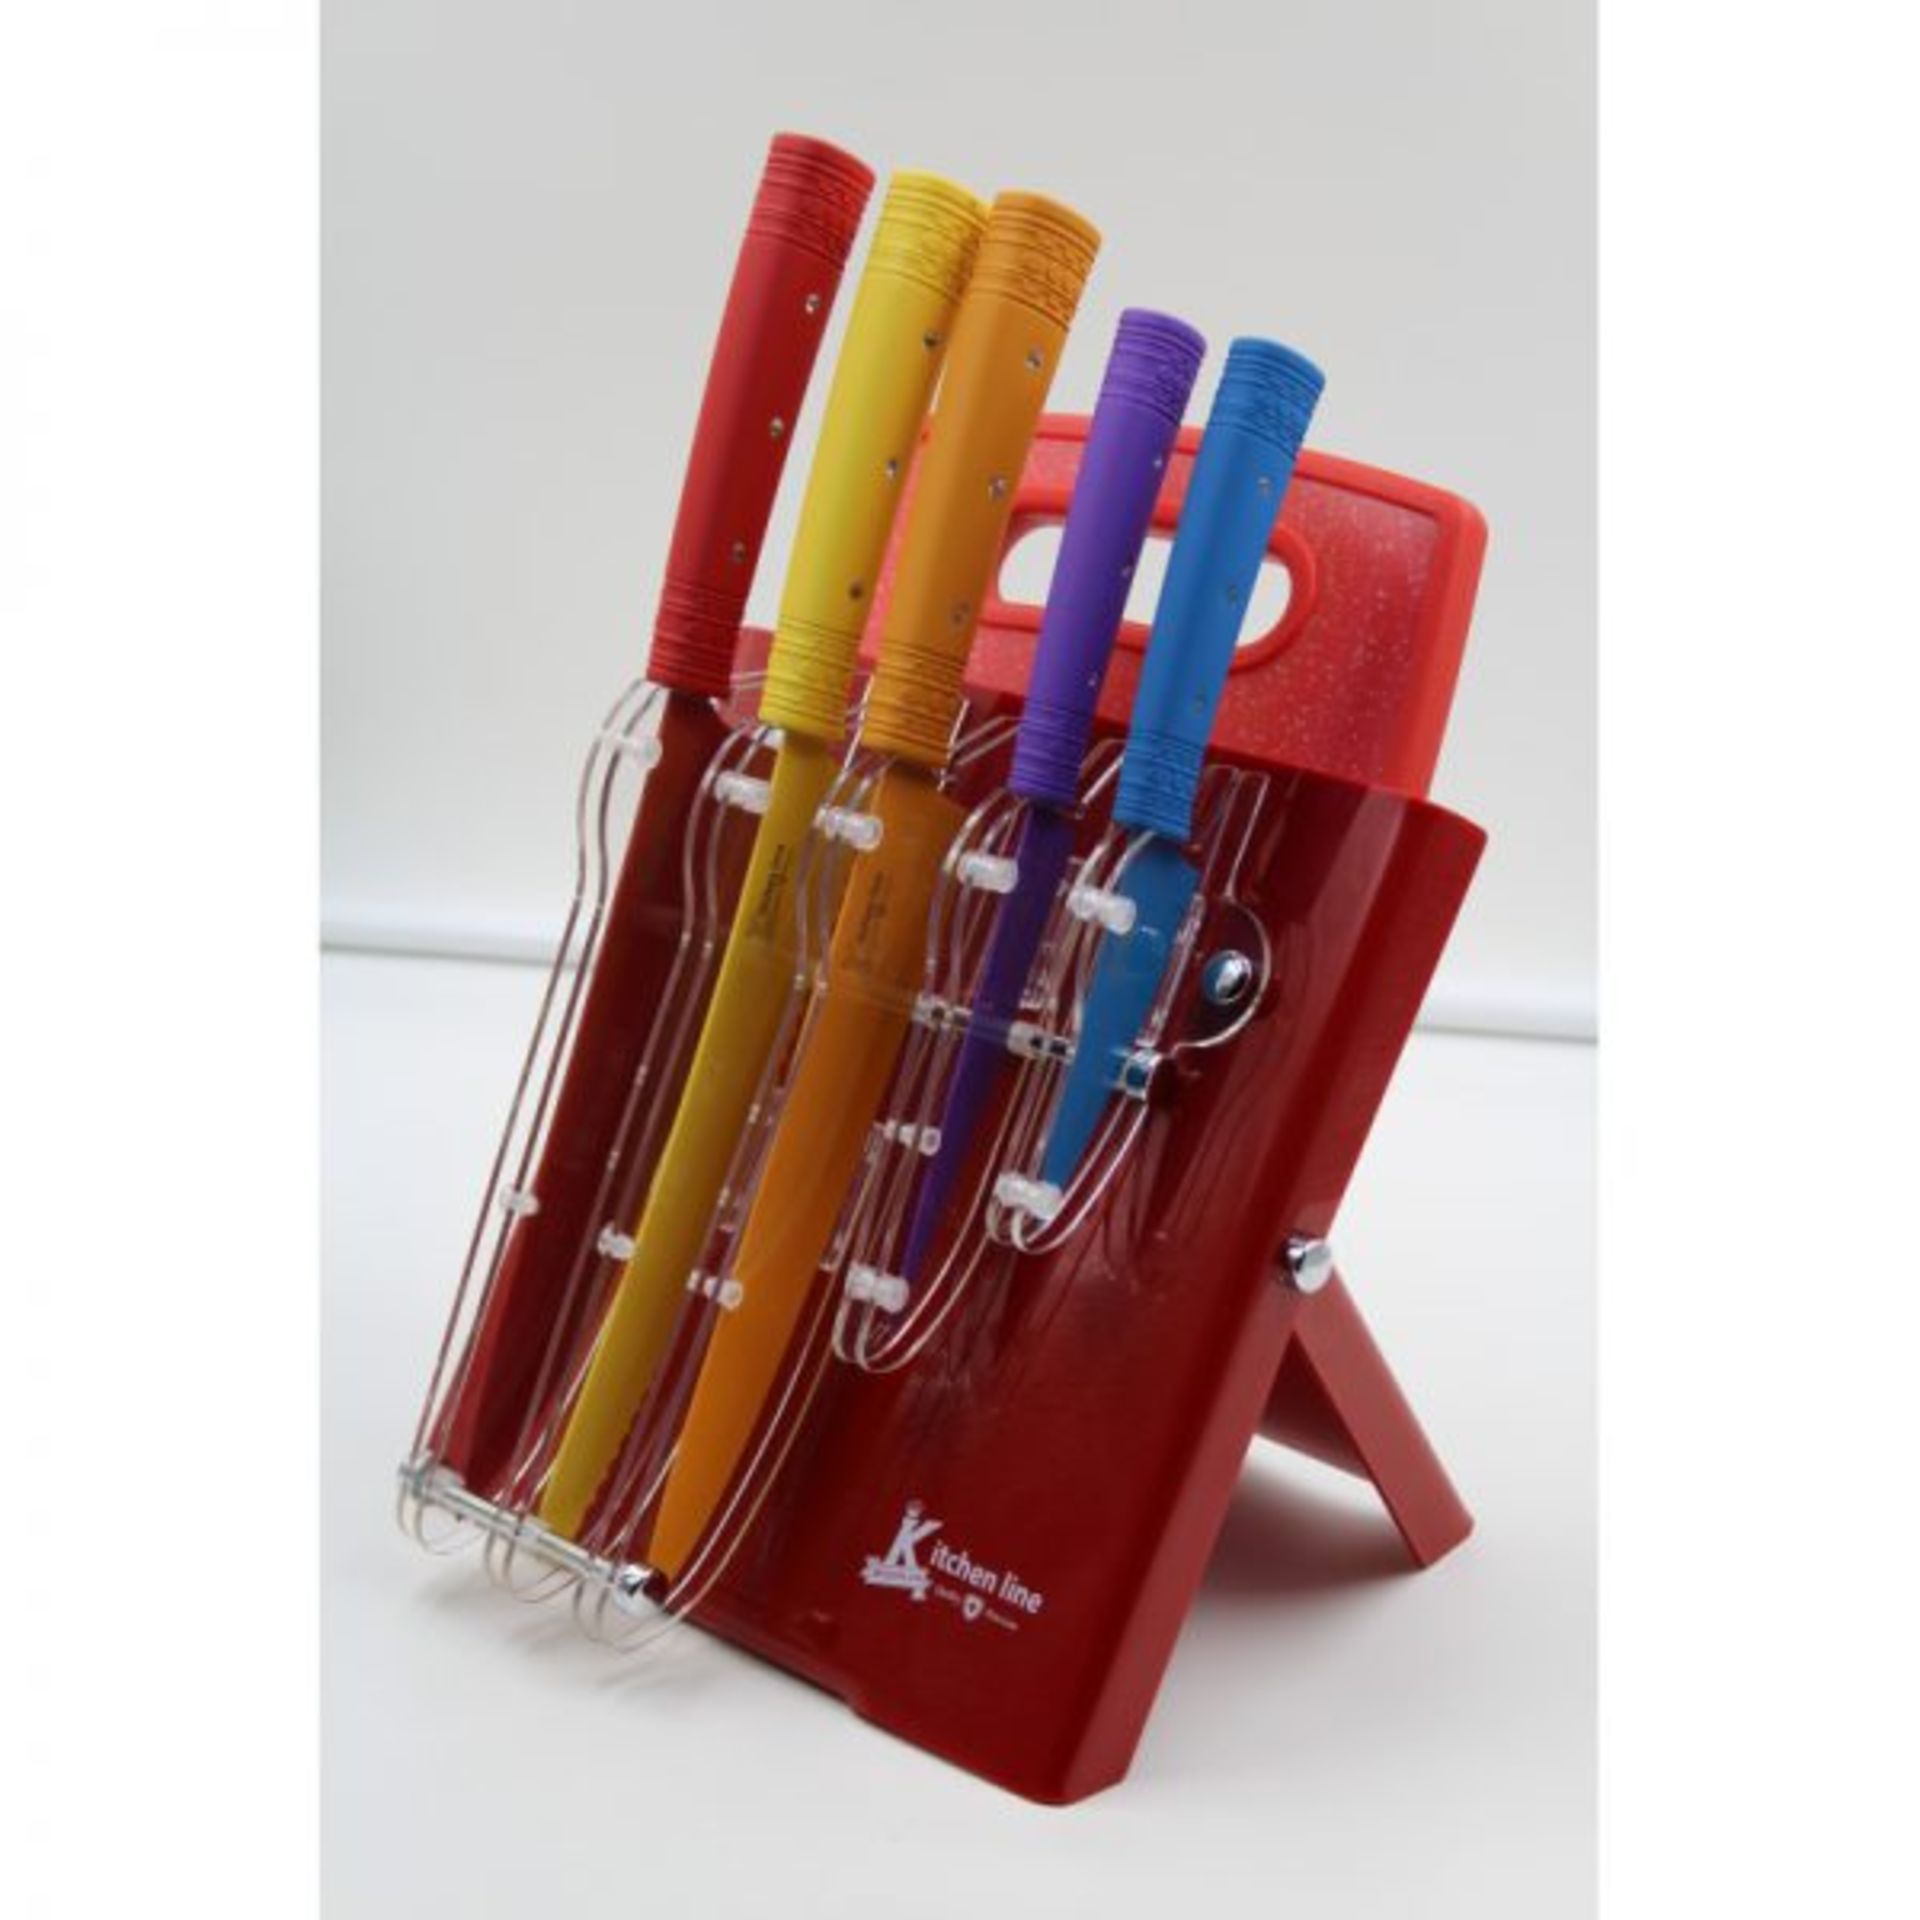 V *TRADE QTY* Brand New Kitchen Line Switzerland 7 Piece Knife Set With Acrylic Stand Includes 8"